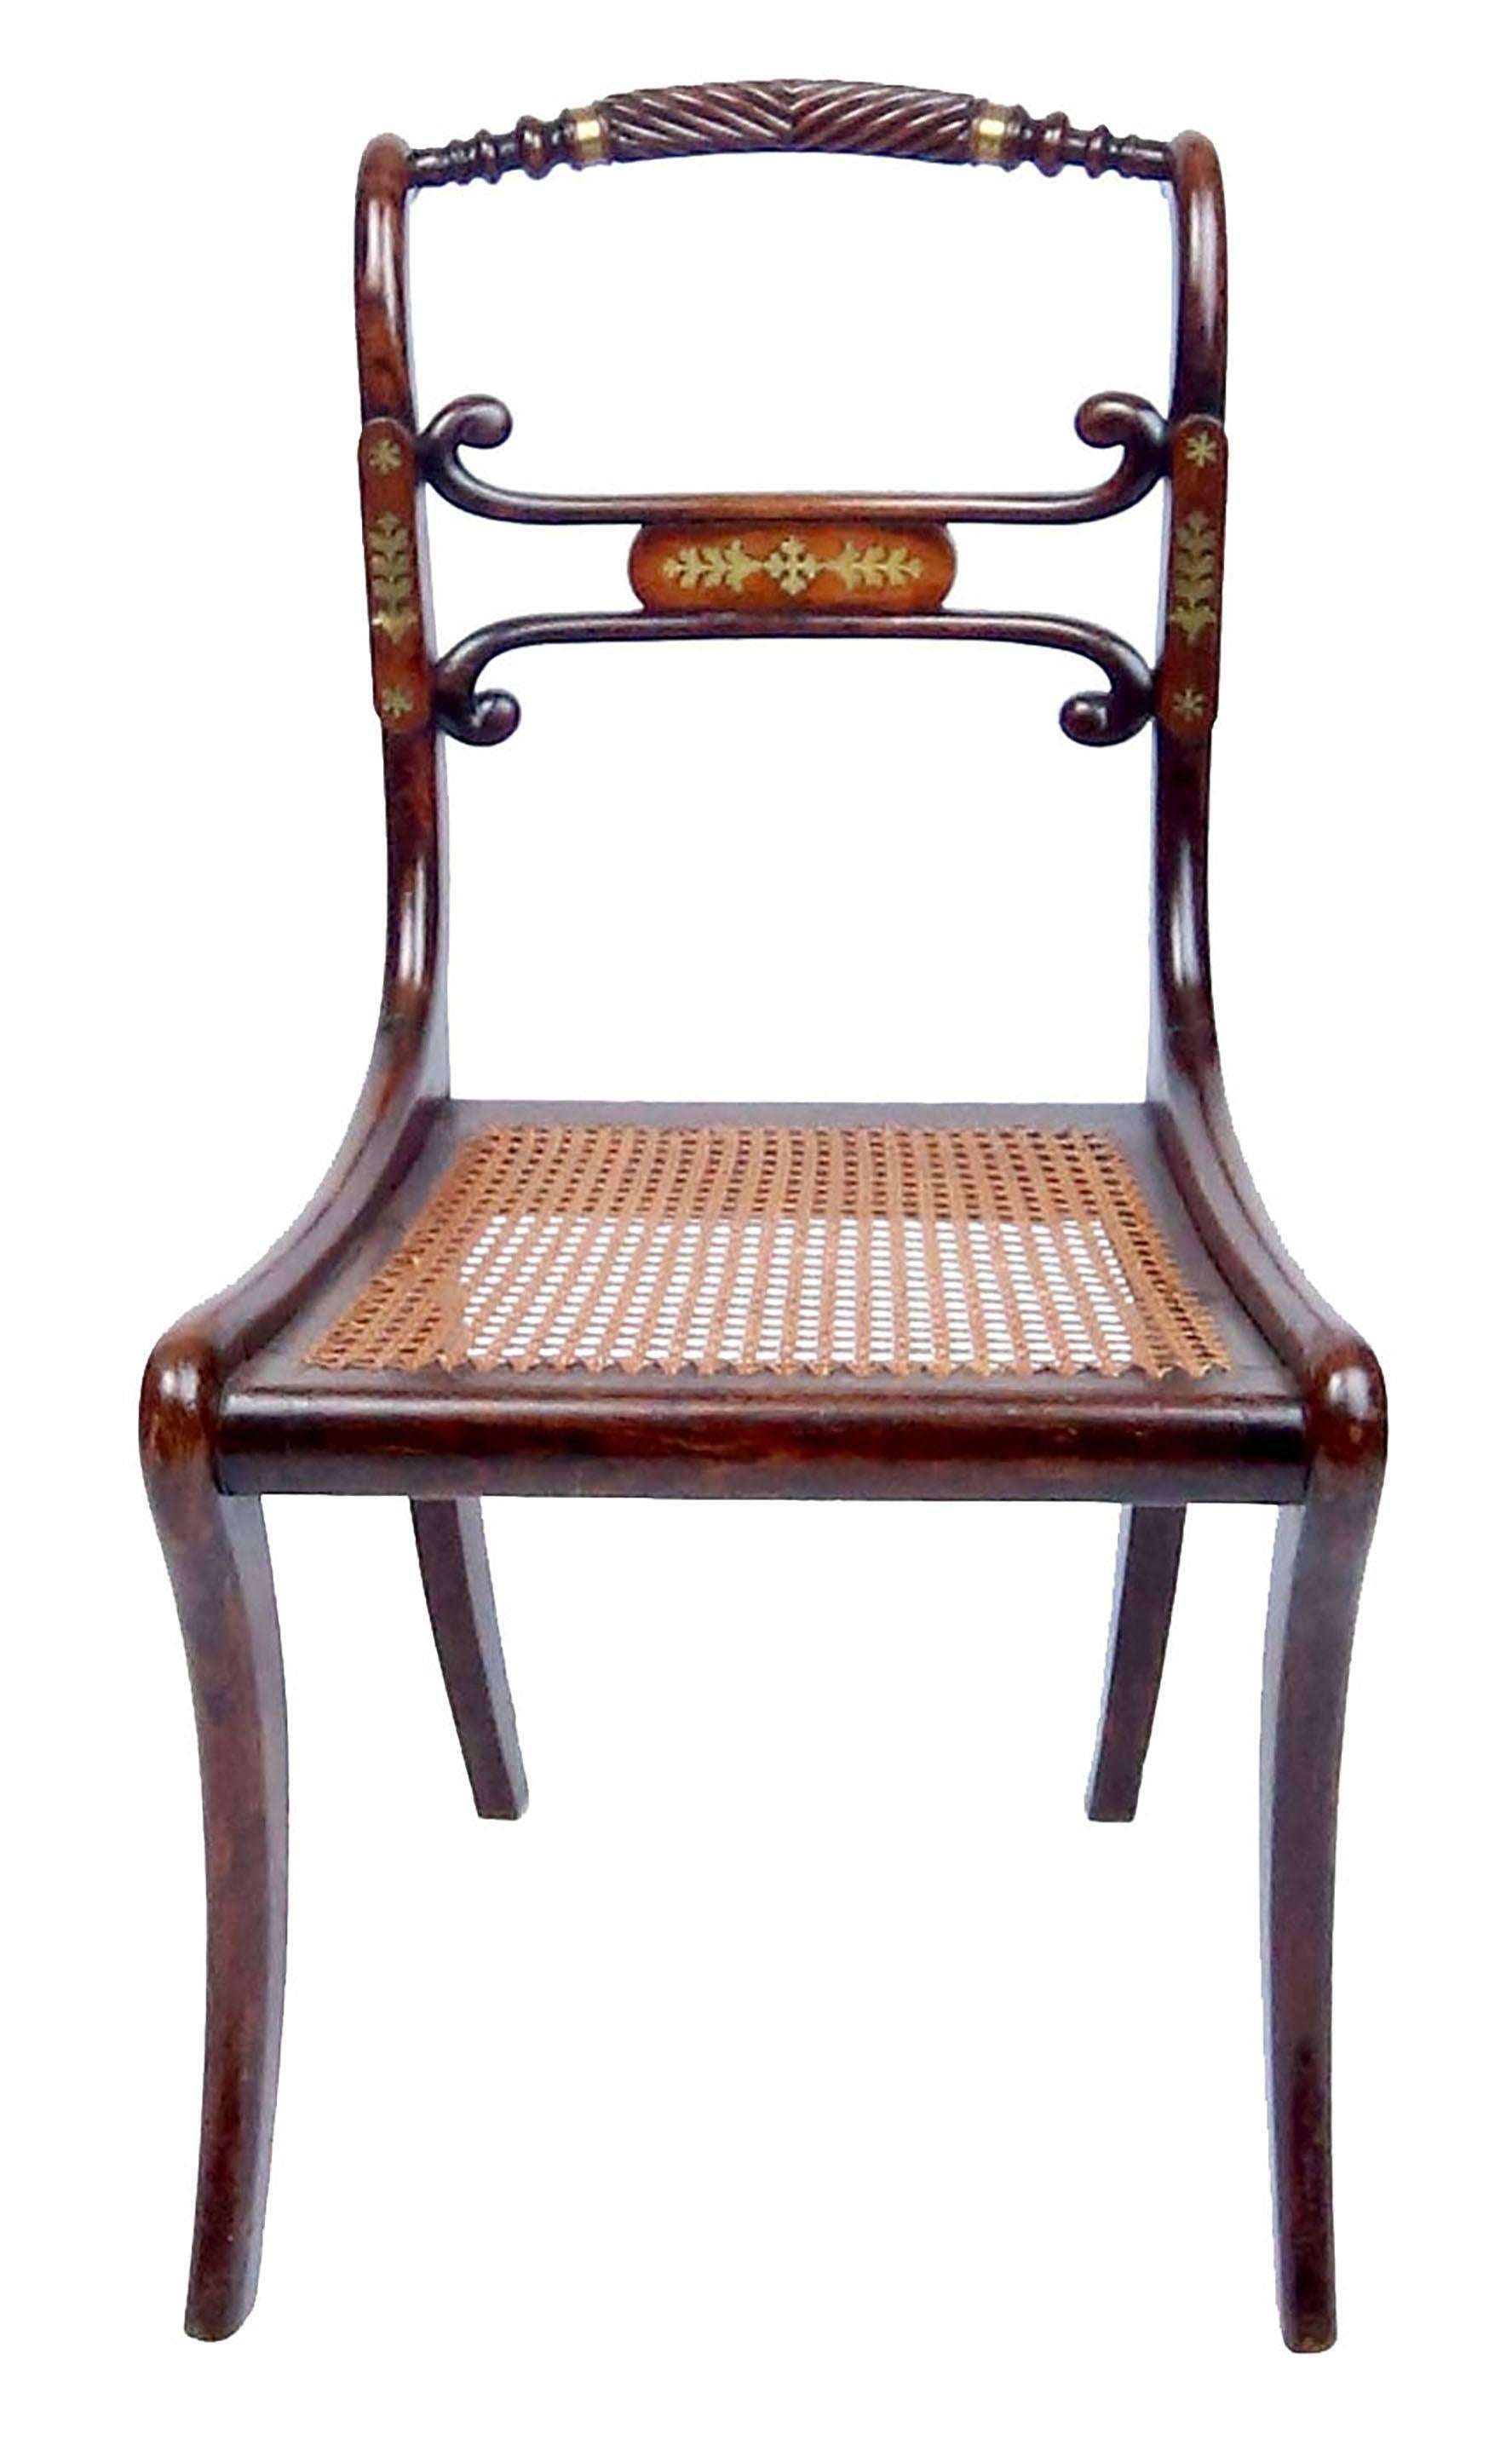 Four fine George III faux painted rosewood chairs with inlaid brass details, gadrooned crest rail, and saber legs. Original caned seats, horsehair stuffed button-tufted cushions upholstered in pink silk. One chair bears a mid-20th century sticker